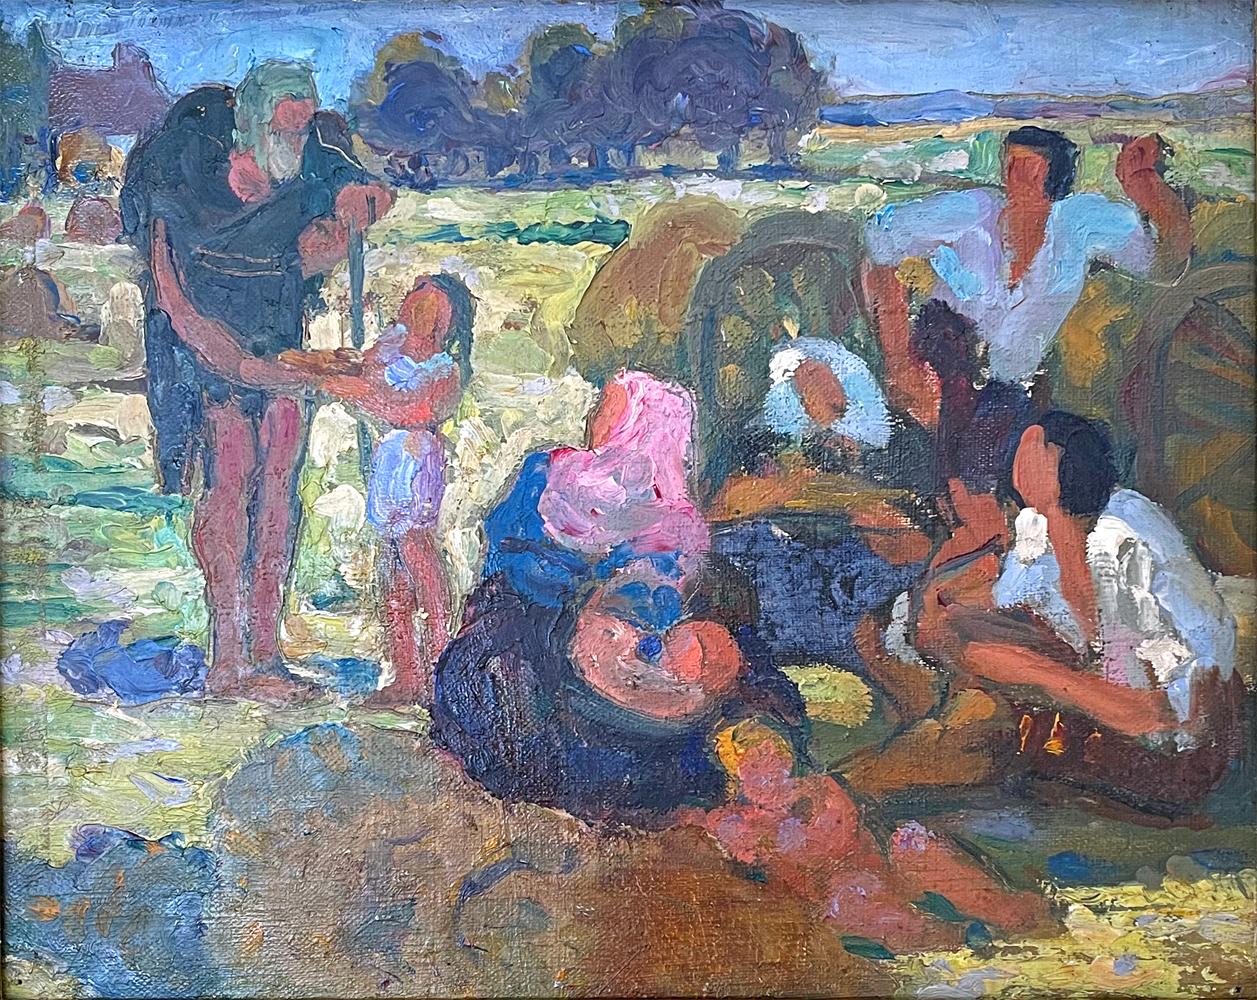 Brilliantly and confidently painted by an important French painter, Augusta de Bourgade, in 1914, this Impressionist painting depicts a group of laborers in the field interacting with the legendary saint, Julian the Hospitaller. Though brought up in